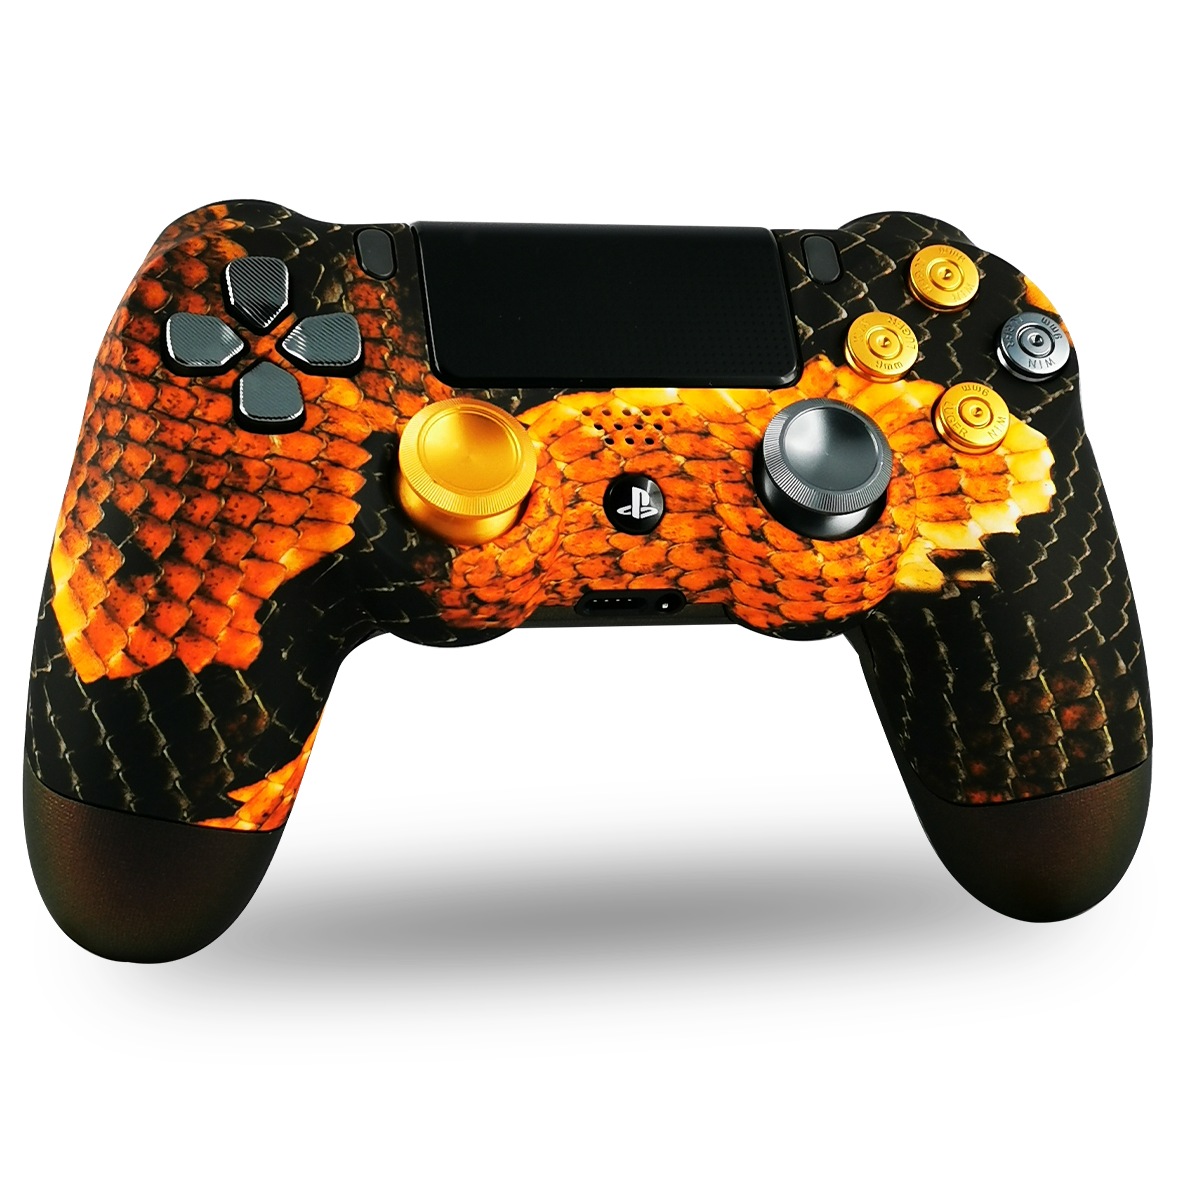 manette-PS4-custom-playstation-4-sony-personnalisee-drawmypad-inconnu13